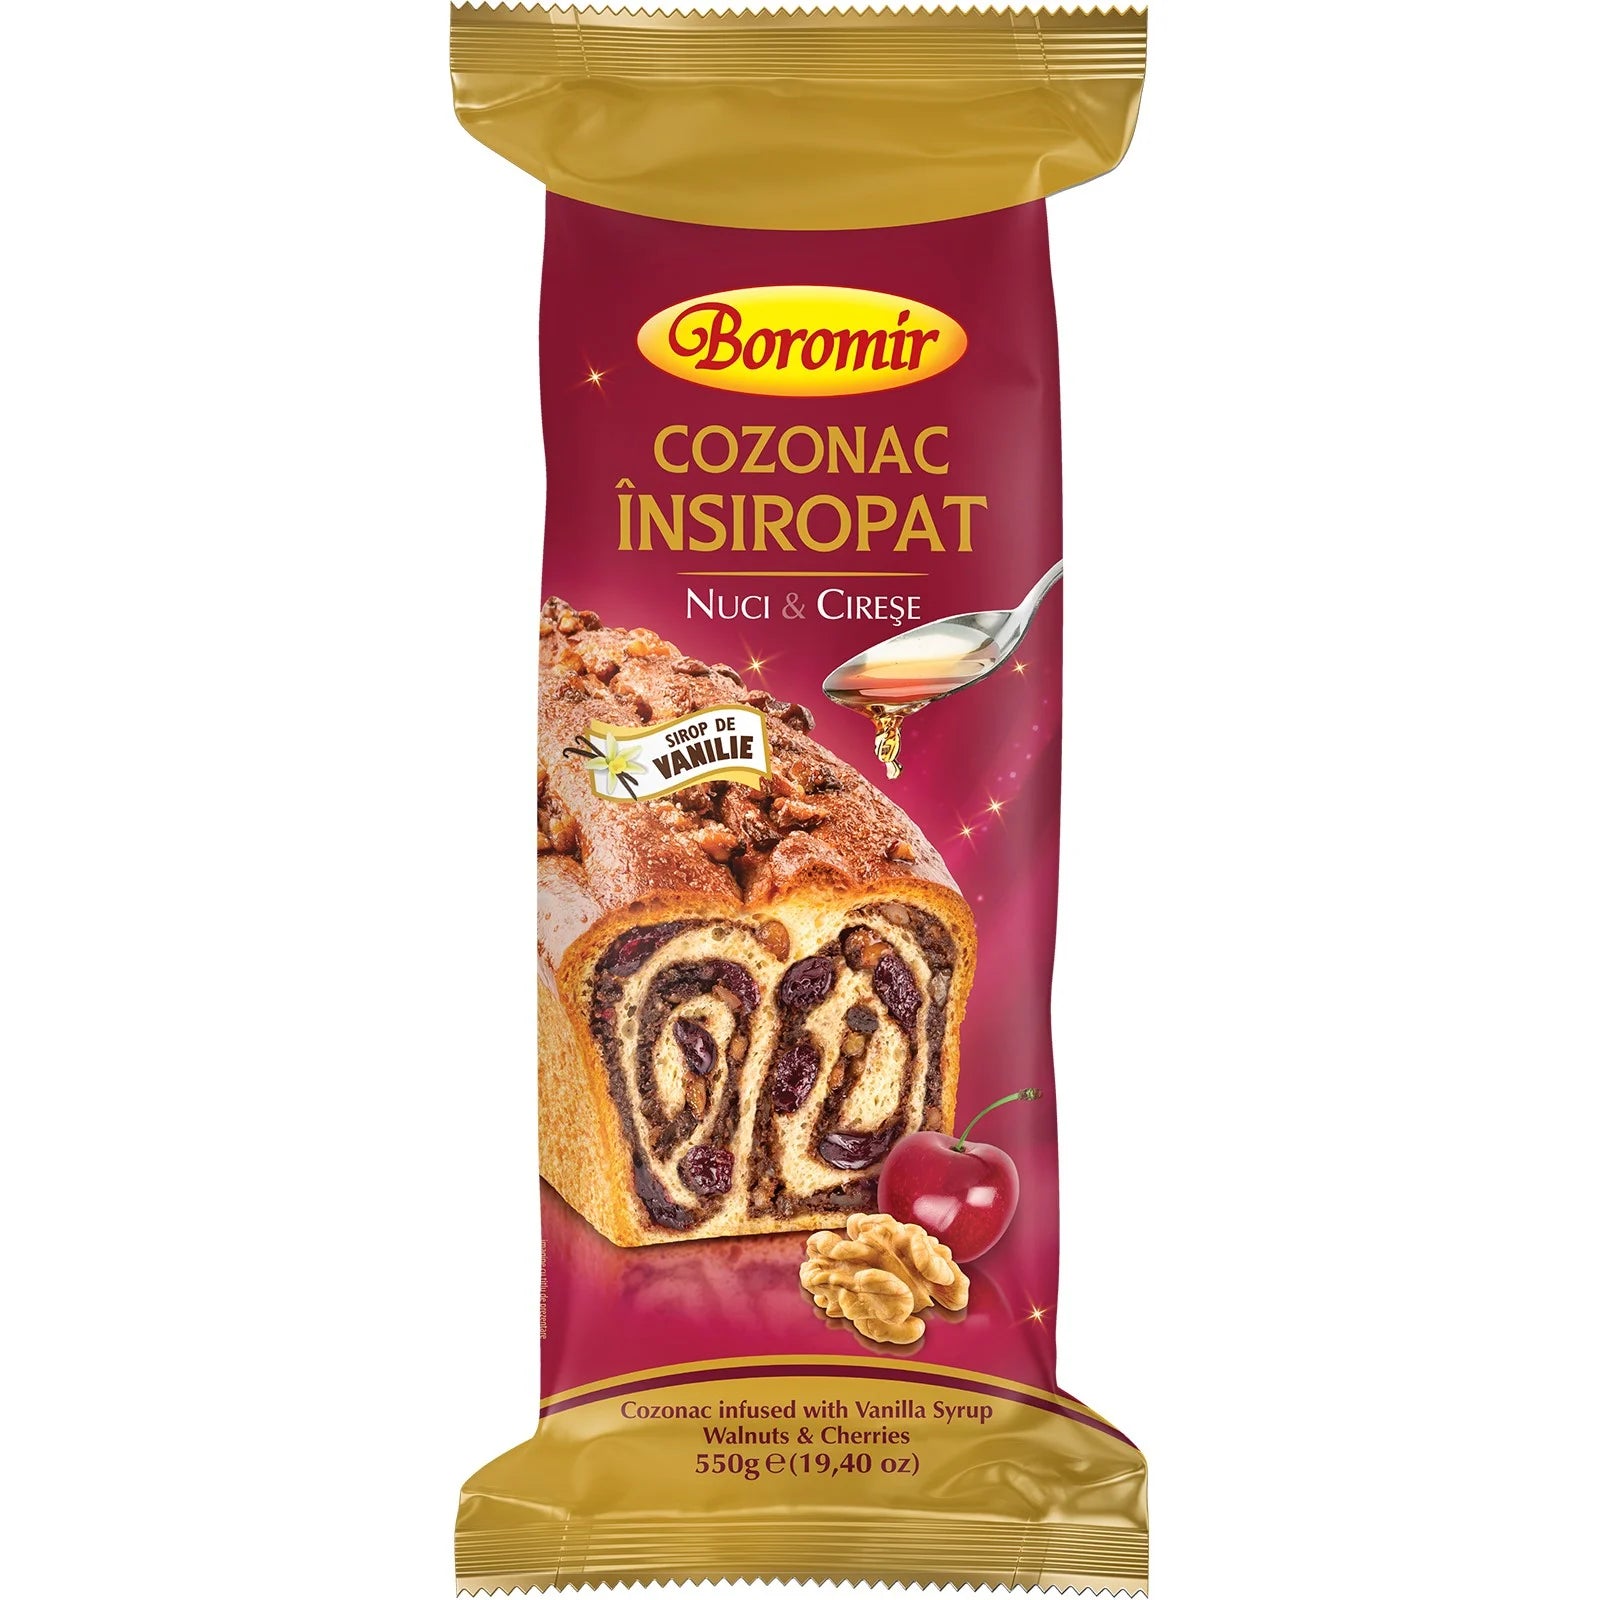 NEW! Boromir Sweet Bread infused with Vanilla Syrup, Walnuts and Cherries - Cozonac Insiropat